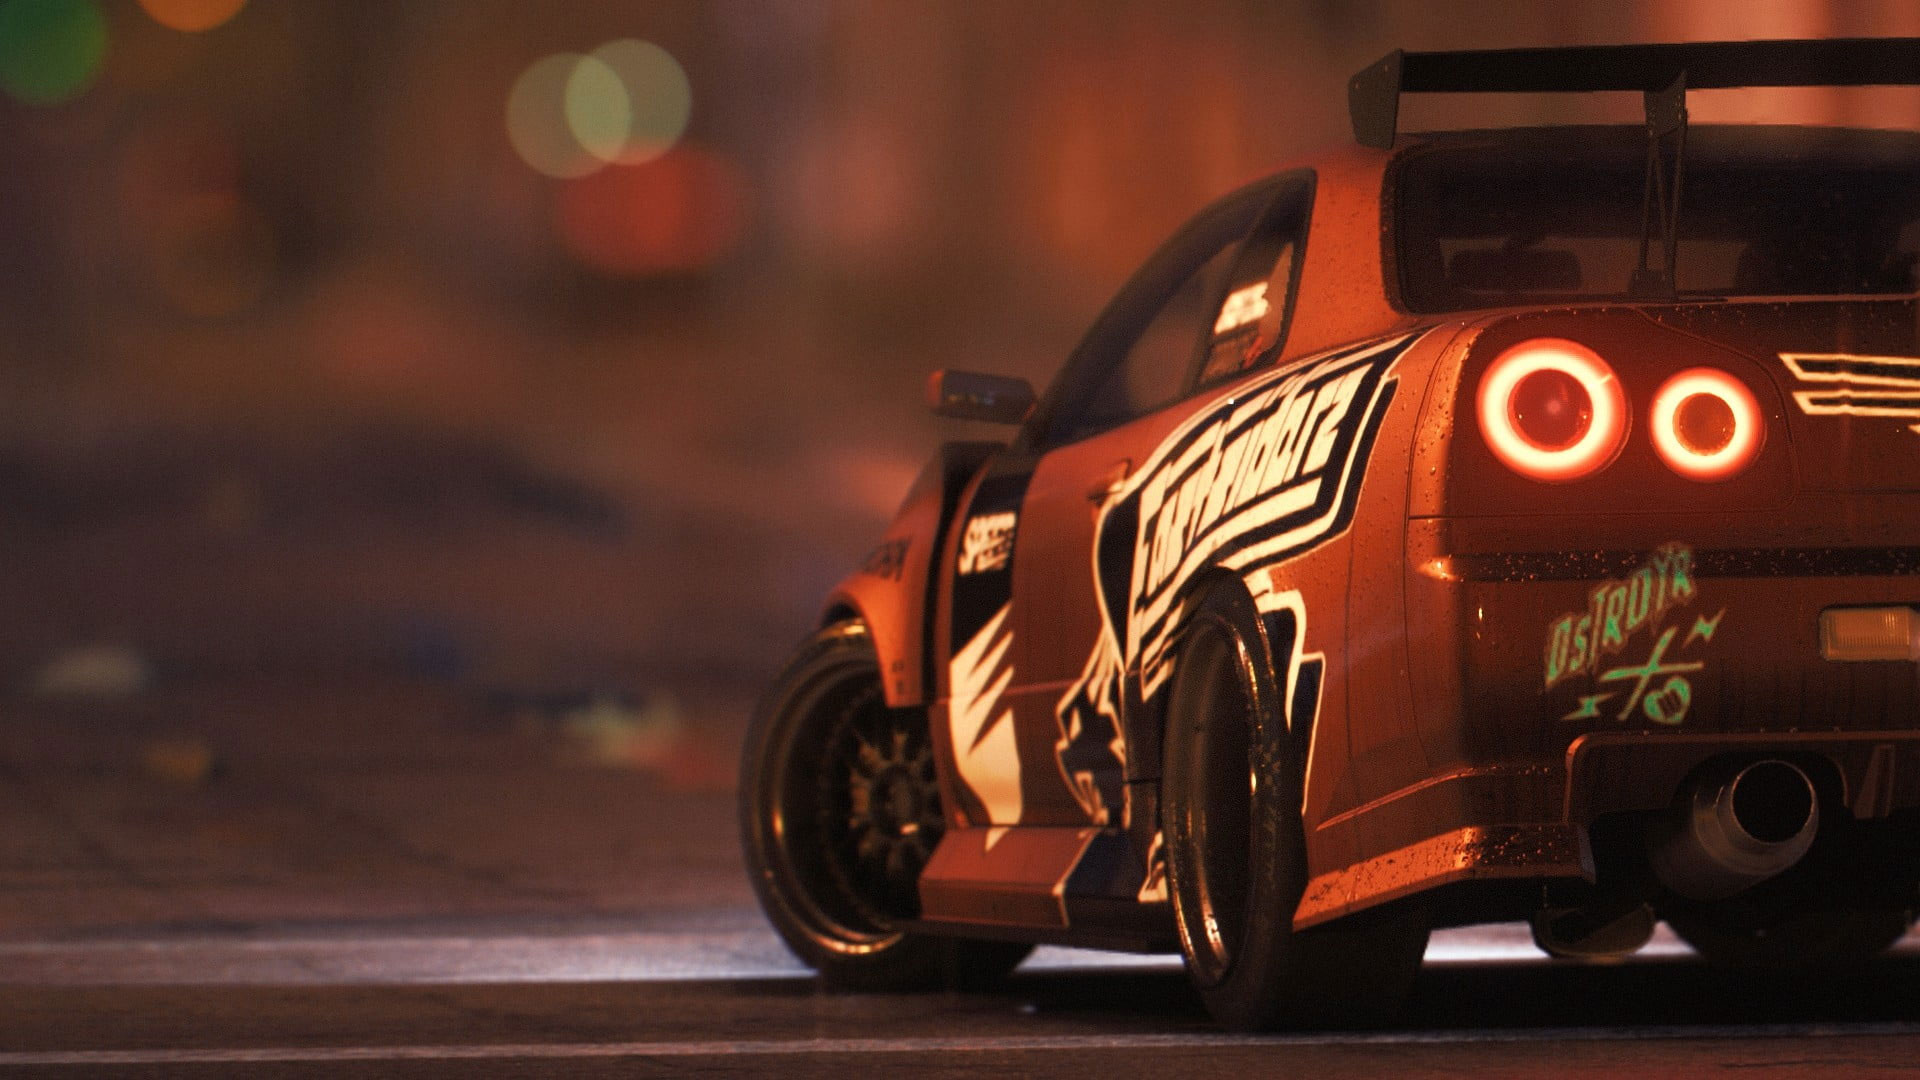 Orange and black racing car wallpaper, need for speed 2016, transportation